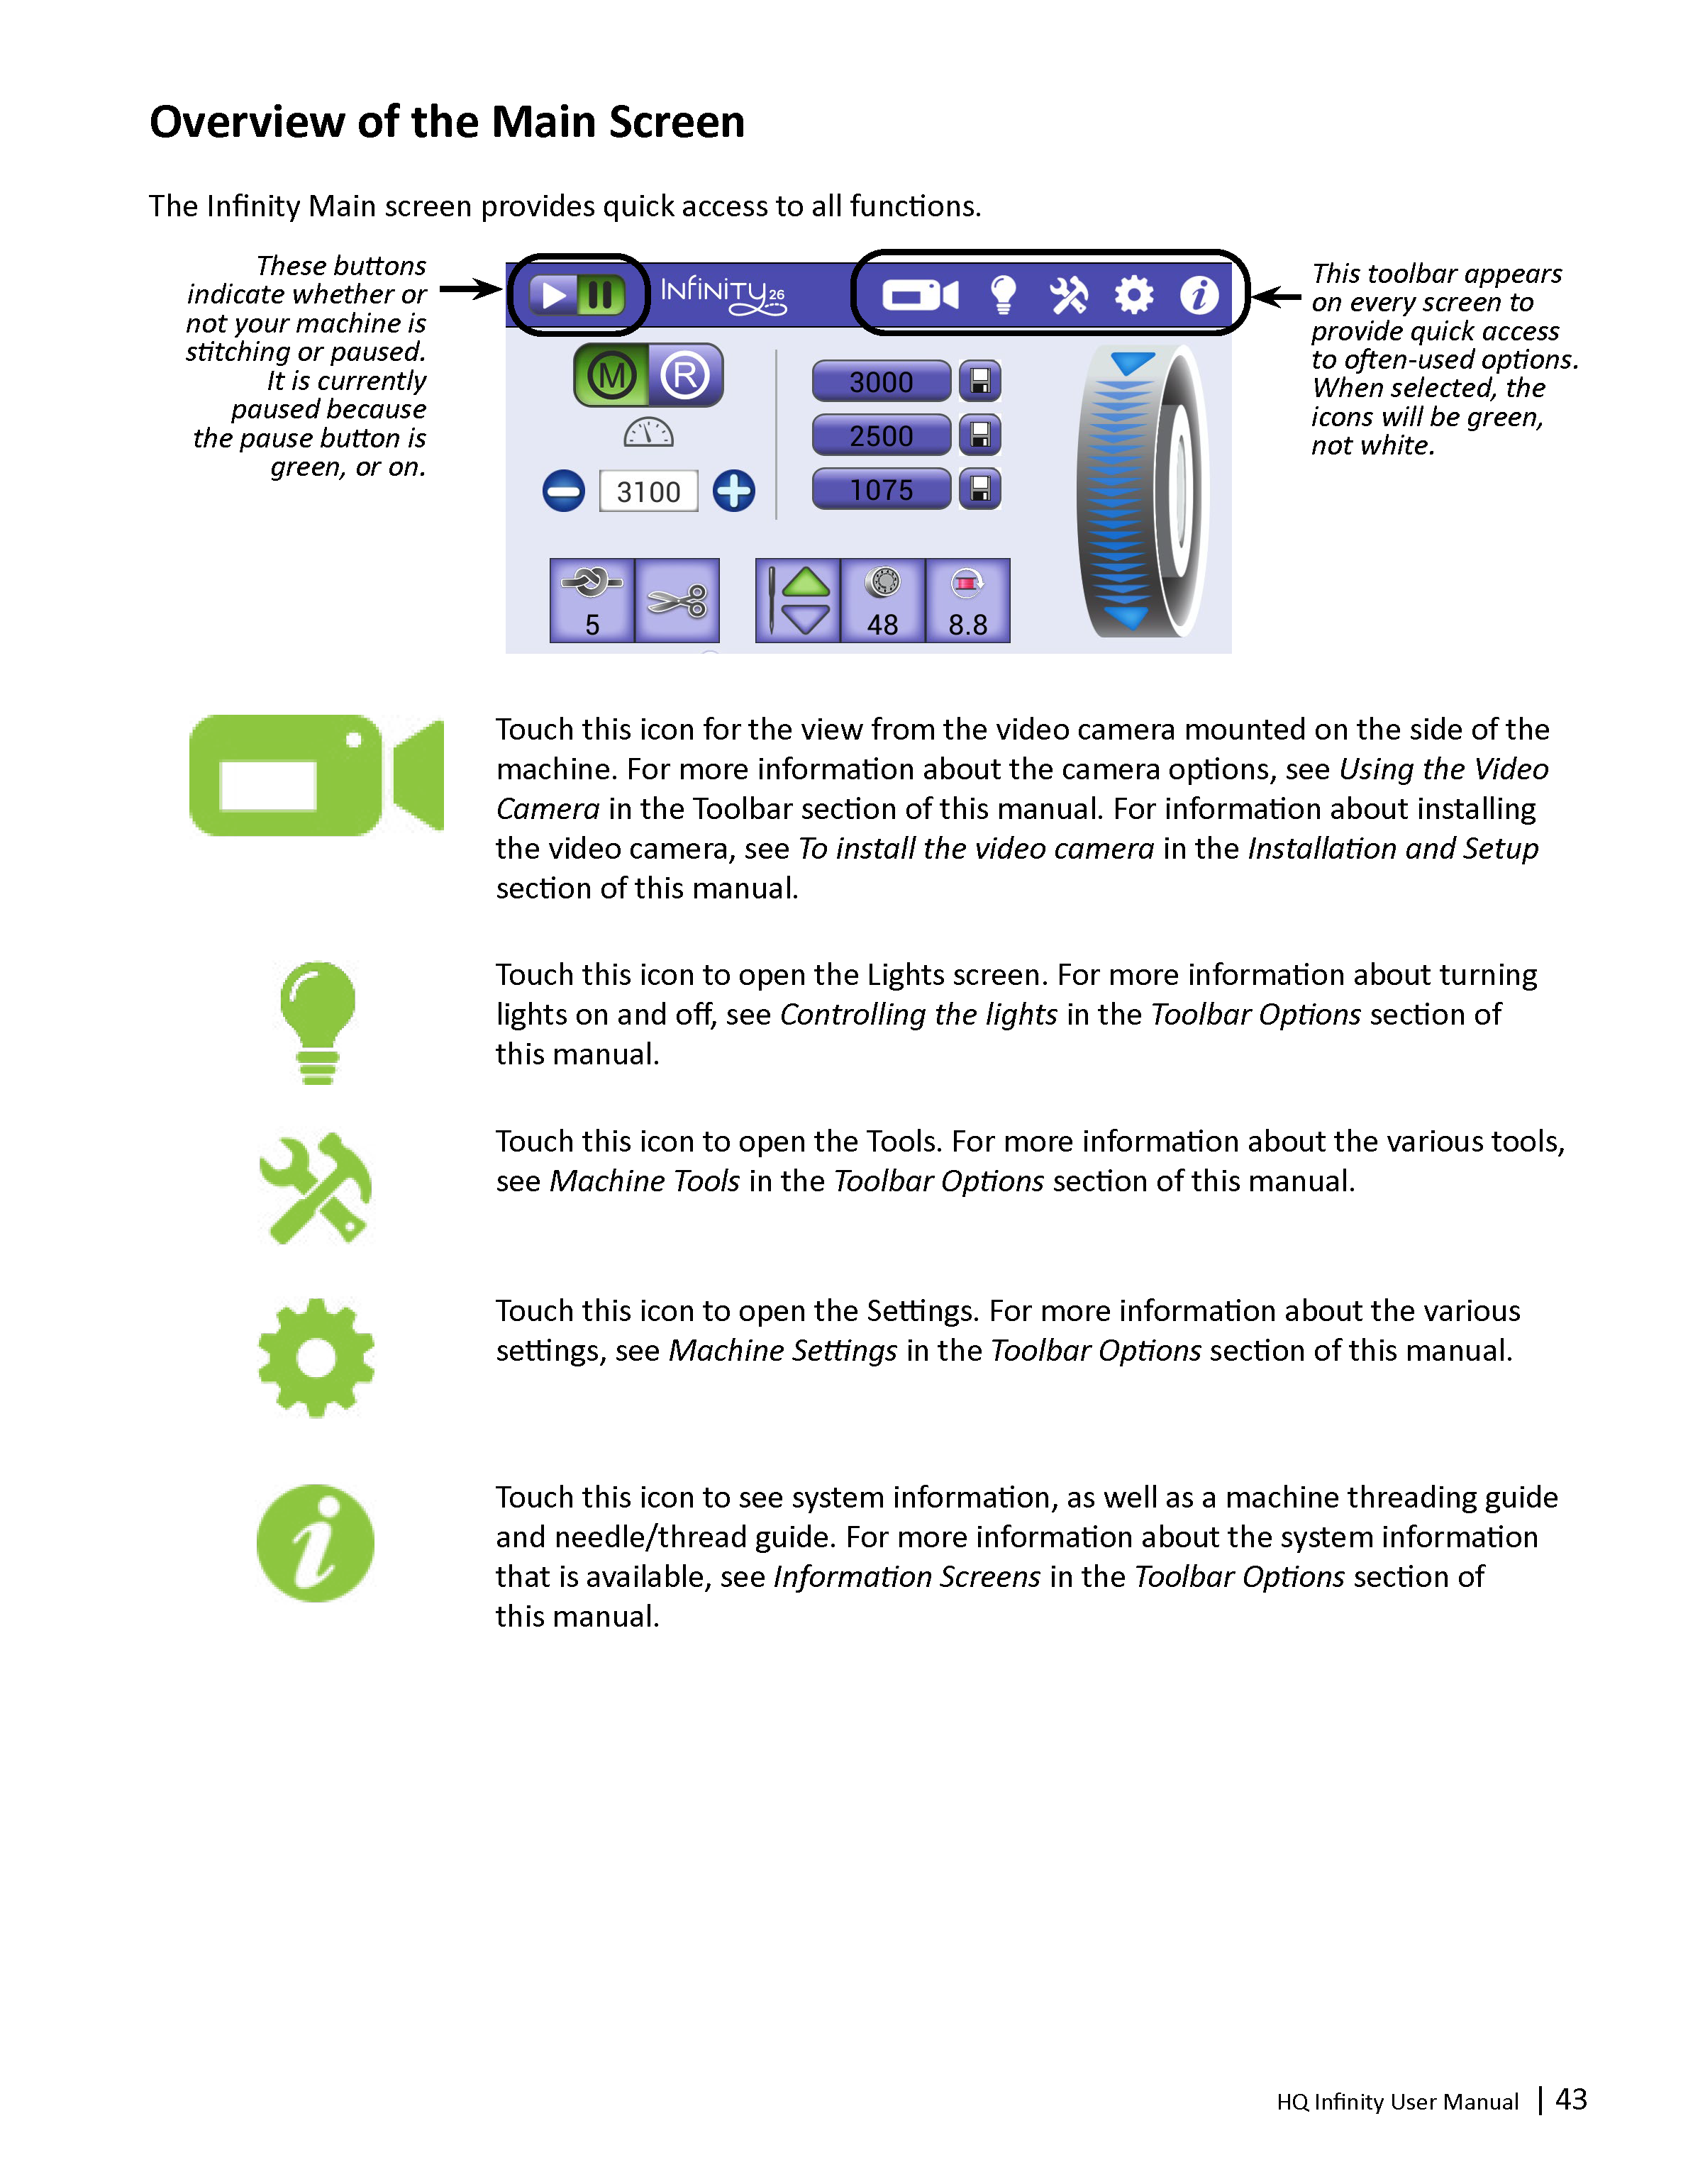 QM33001-HQ-Infinity-User-manual-version-1.4-ALL-Web-1_Page_44.png